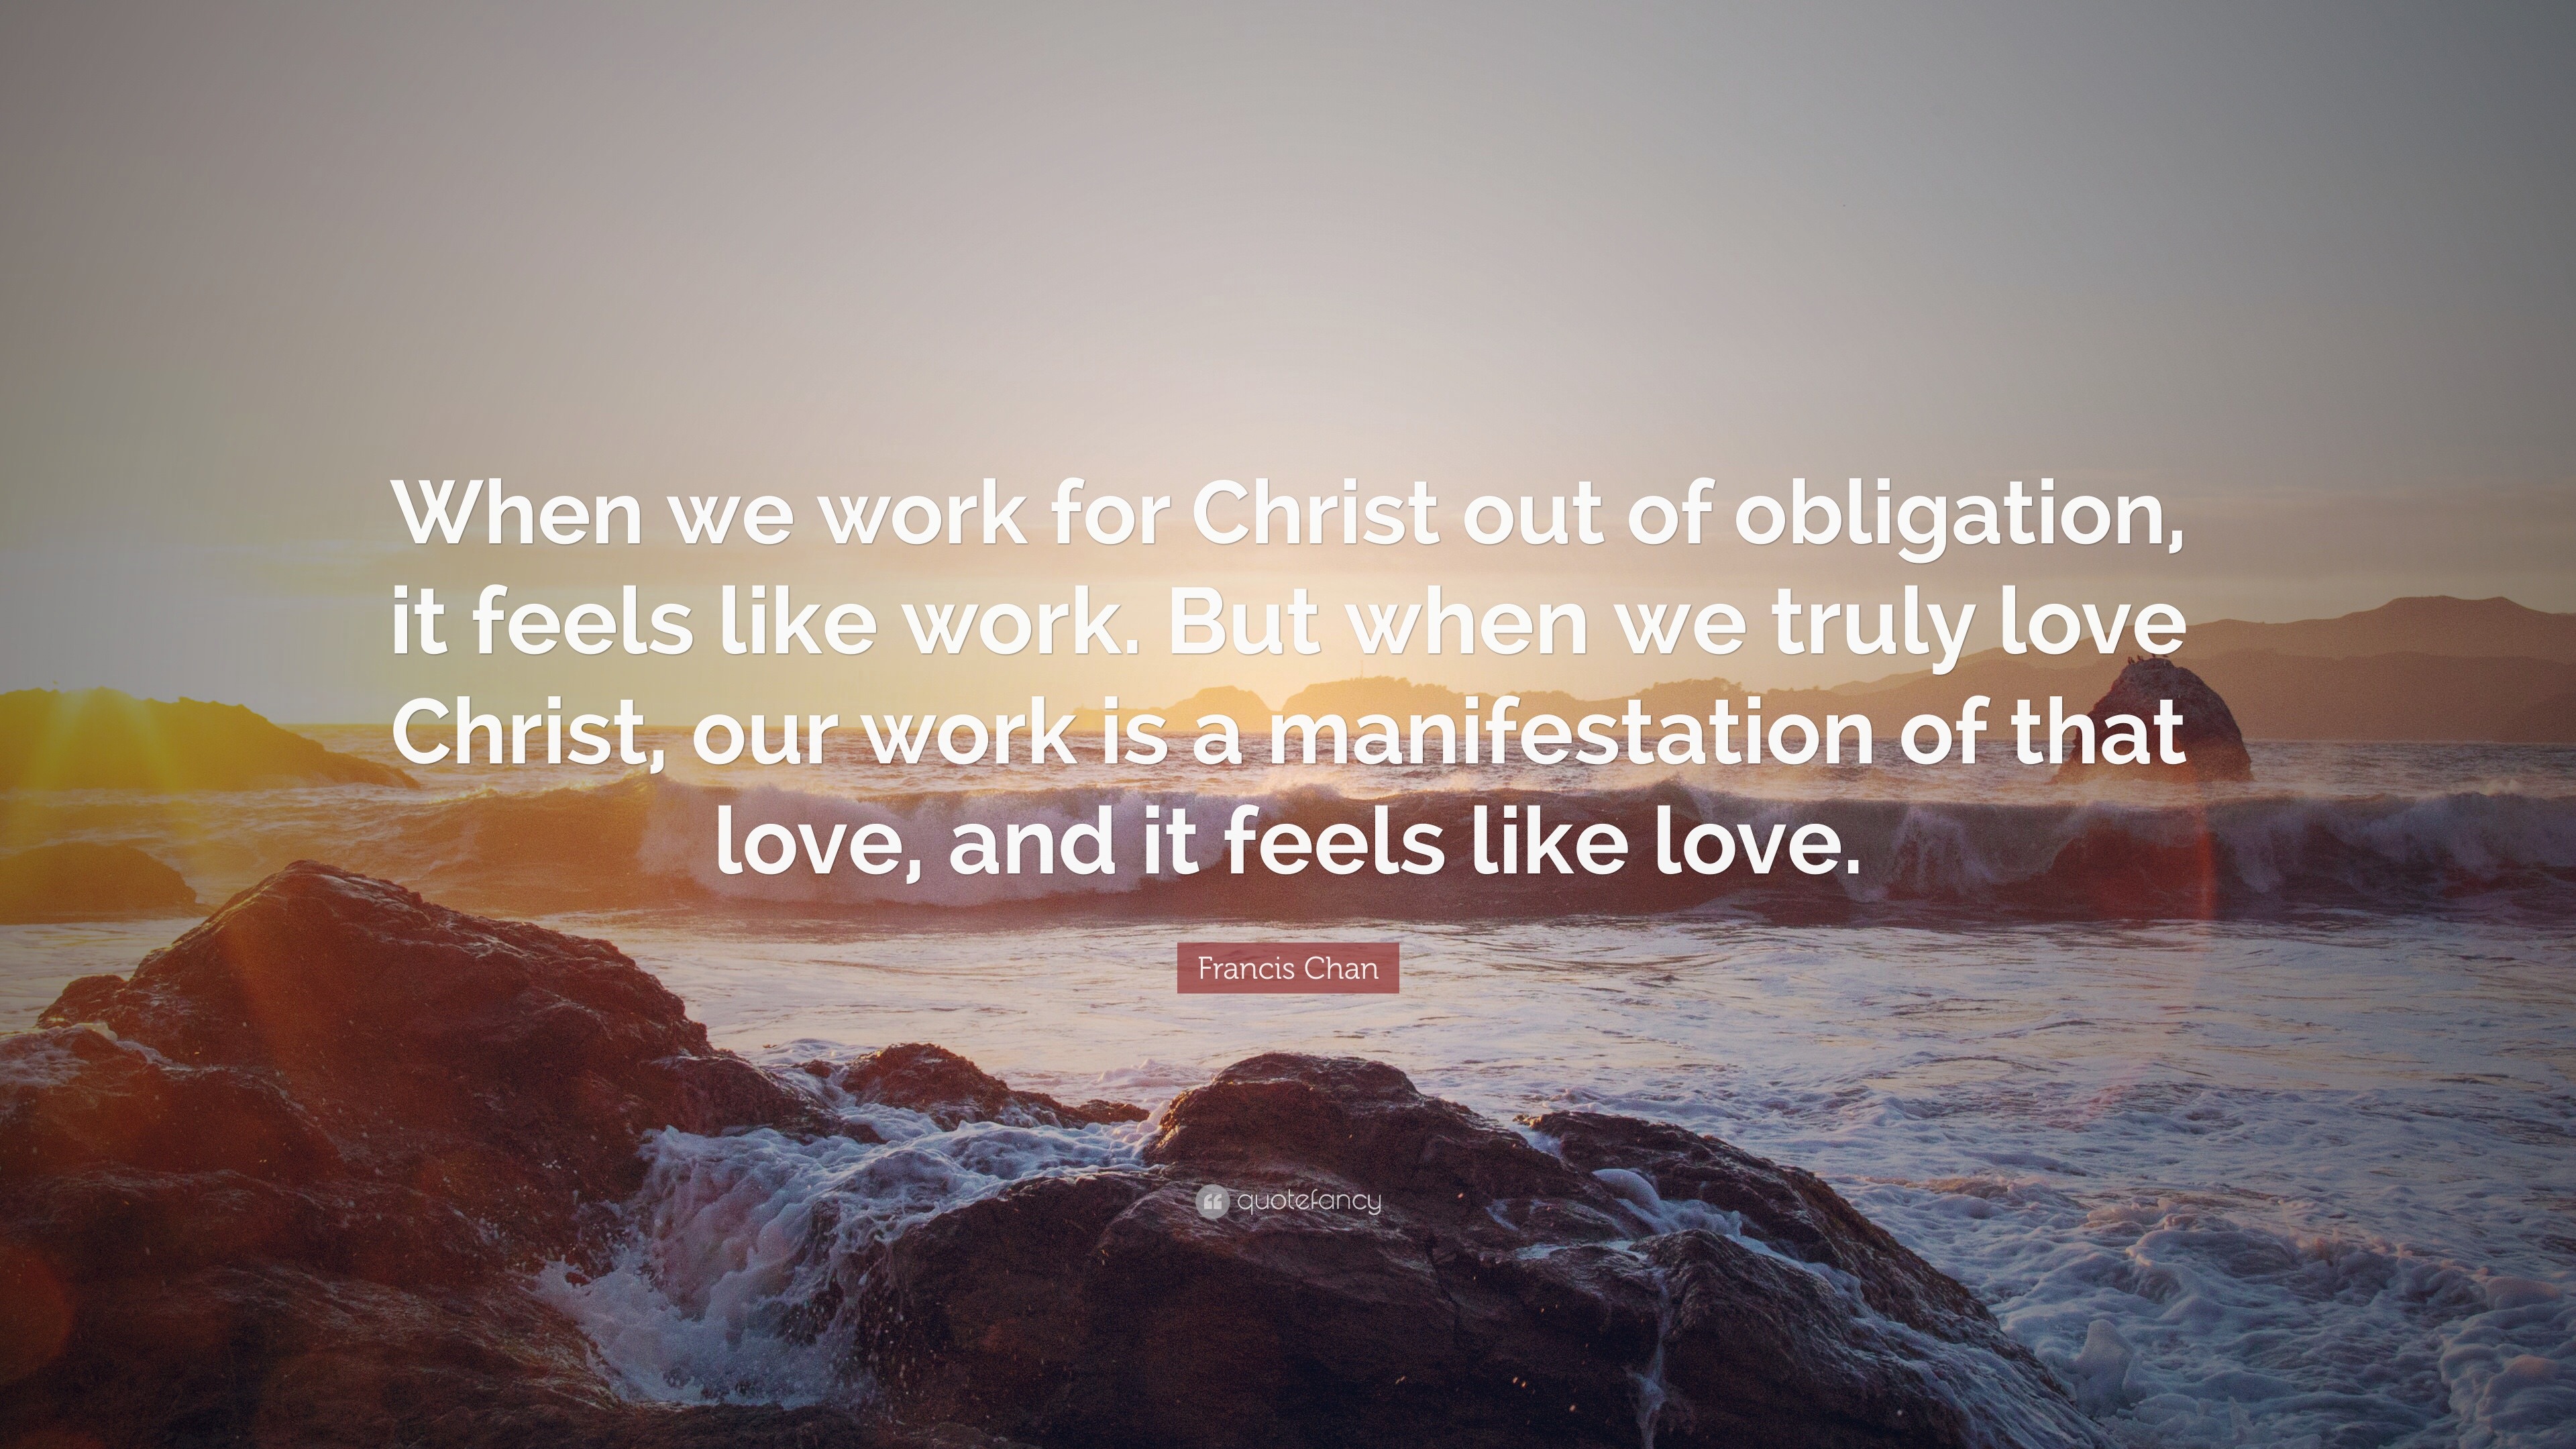 Francis Chan Quote “When we work for Christ out of obligation it feels